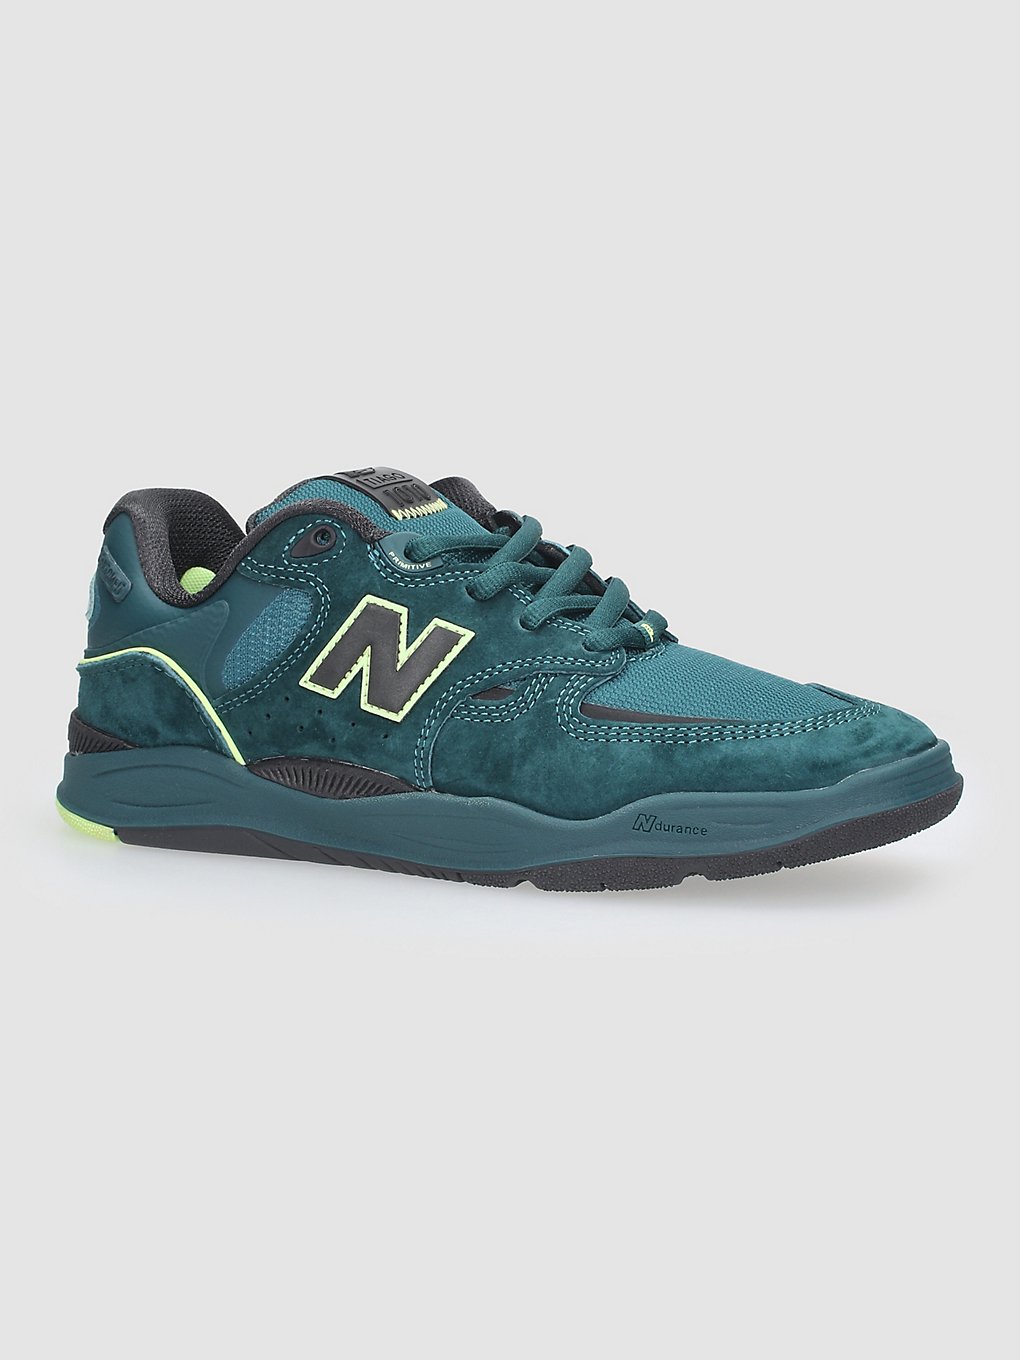 new balance numeric 1010 skate shoes lime green